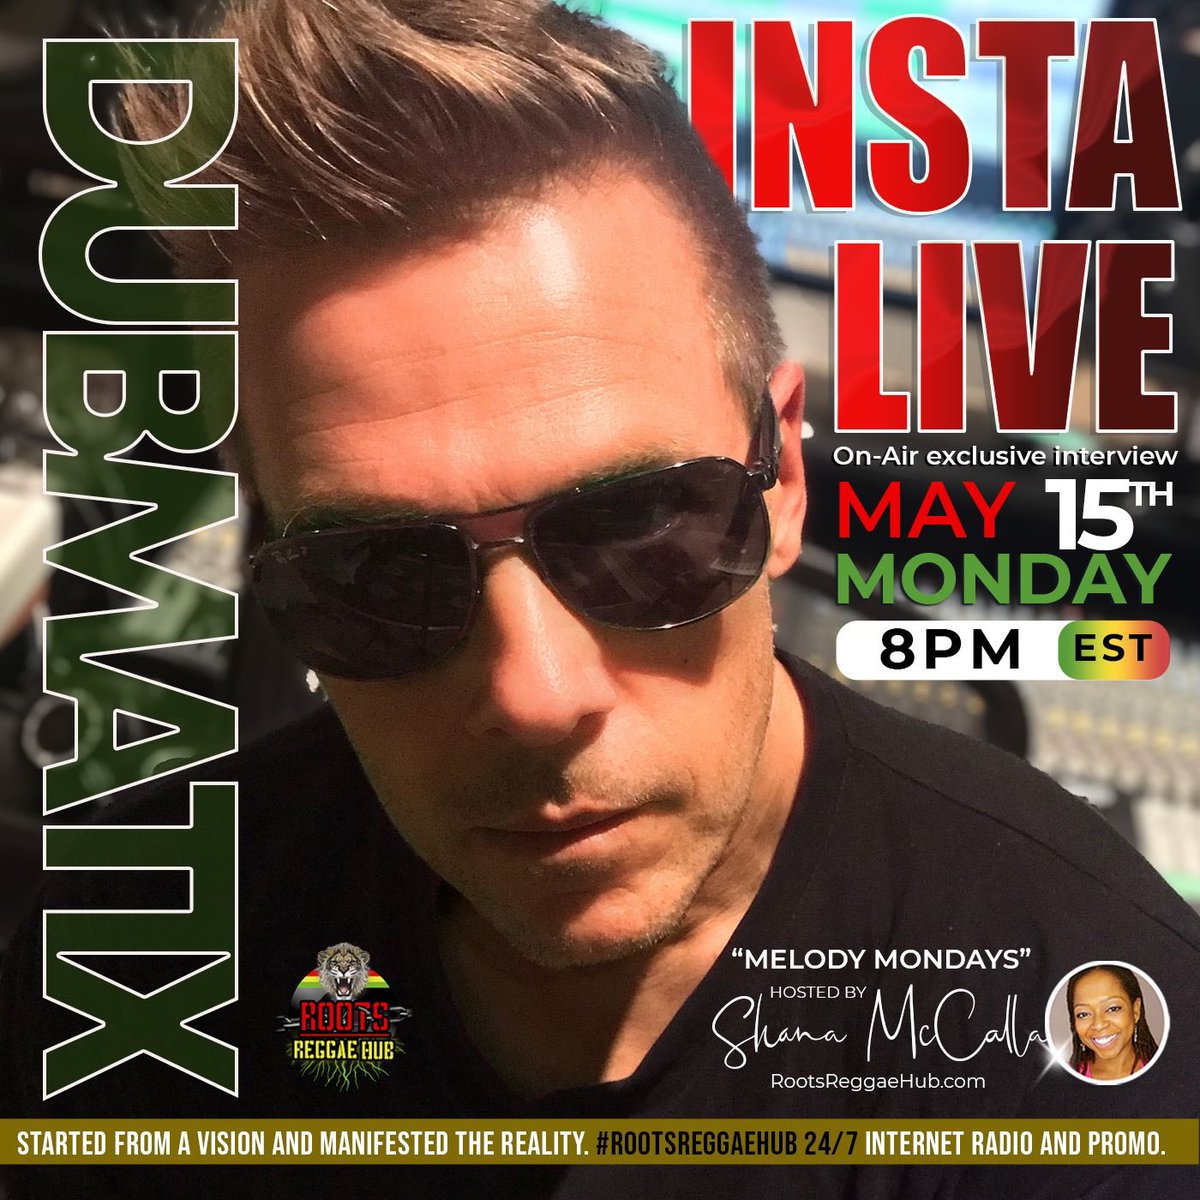 🎶🚨 Join us for an incredible edition of 'Melody Mondays' Insta Live and On-Air Exclusive Interview with the renowned @dubmatix TONIGHT, at 8pm EDT in Toronto, Canada 🇨🇦 (5pm PDT for our West Coast #Reggae Family). Hosted by Shana McCalla, this event promises to be a reggae…